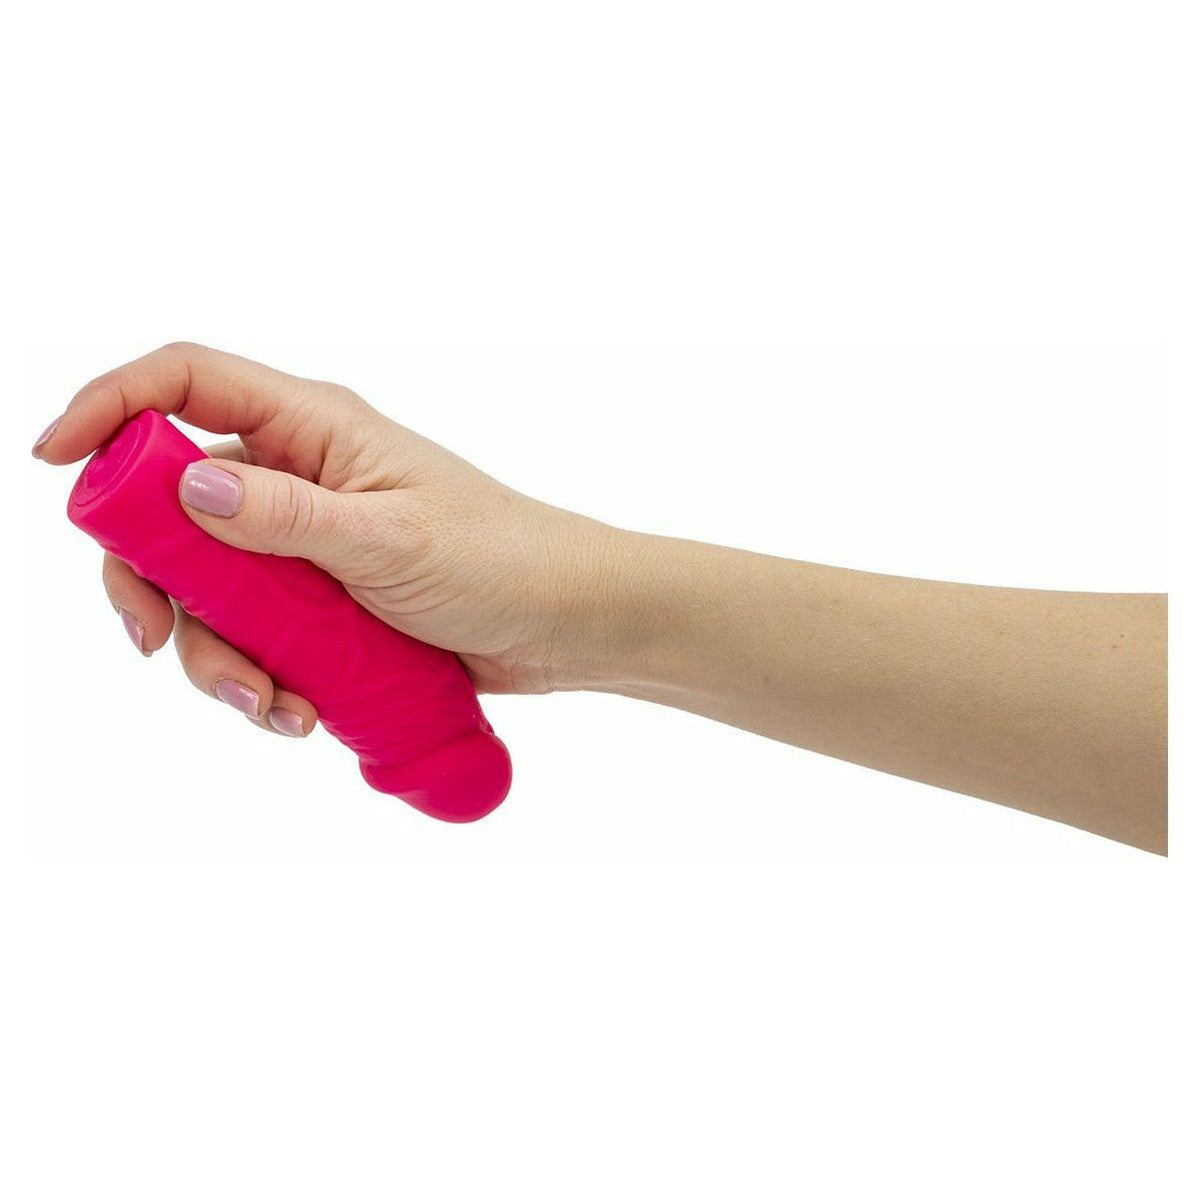 G-Touch Rechargeable Silicone Dong - Pink